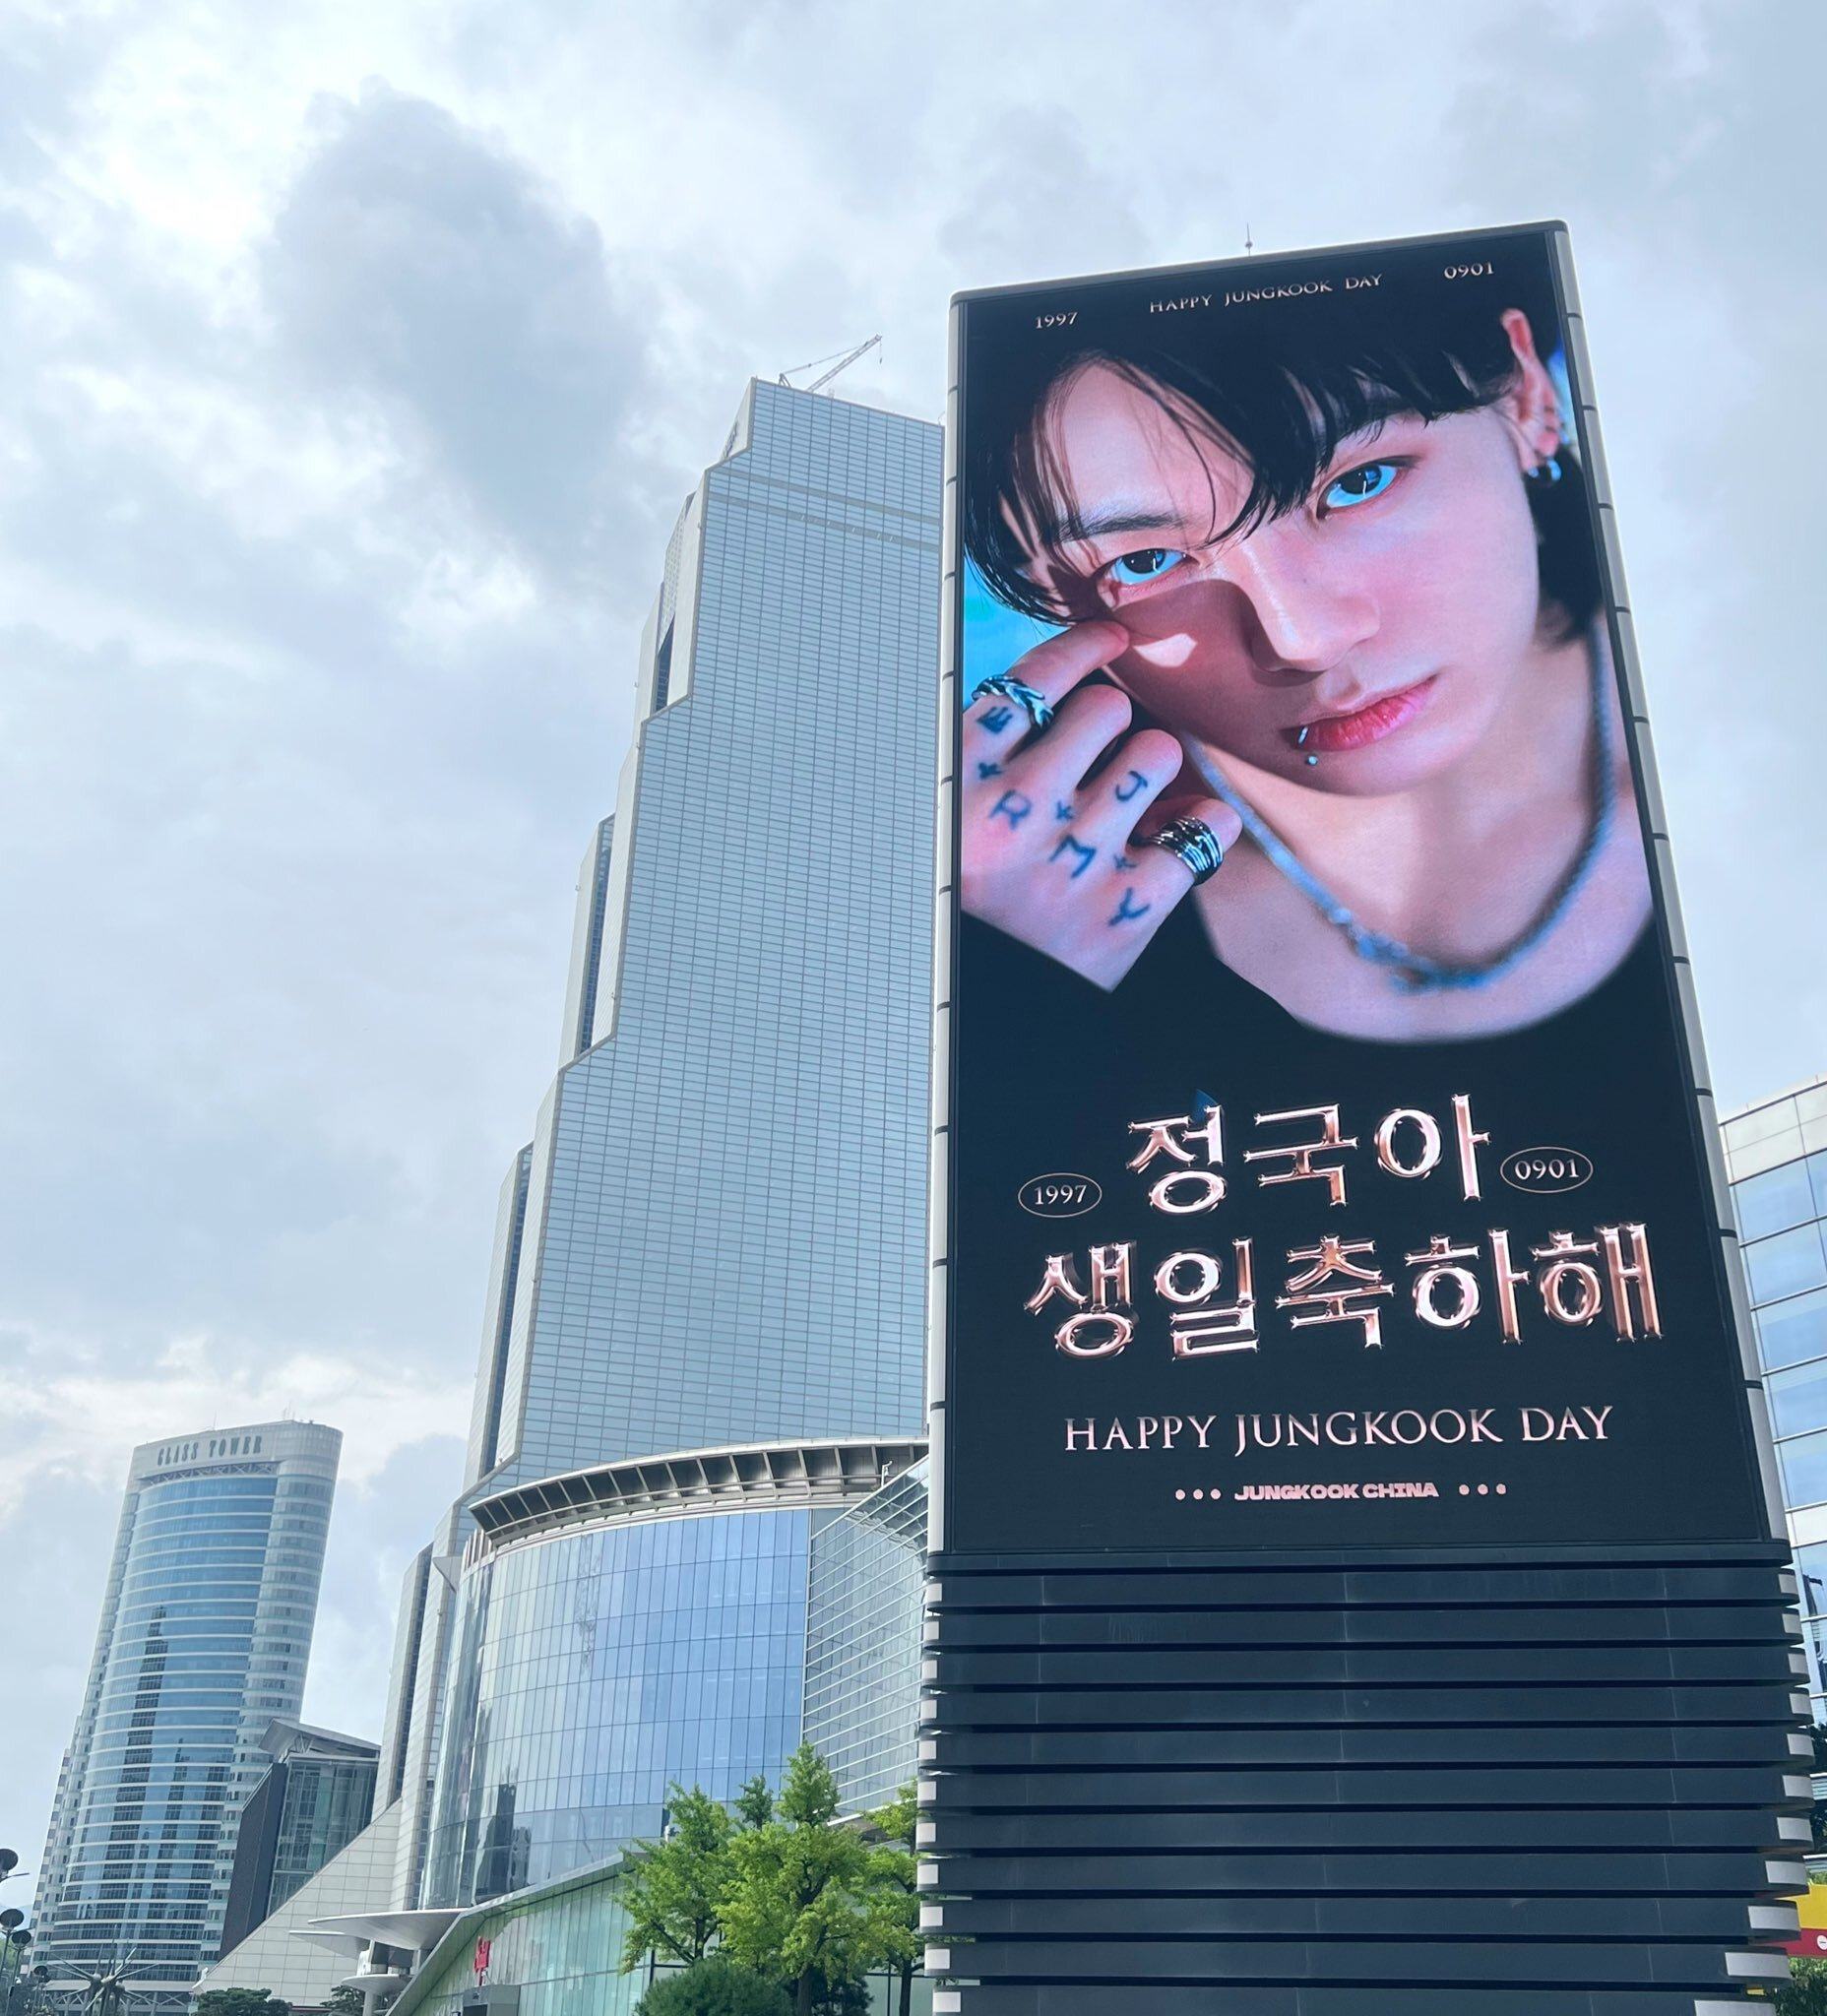 Fan club Jungkook China paid for ads wishing BTS singer Jungkook a happy birthday on the huge screens of COEX Media Tower in Seoul. Photo: Jungkook-SNS/X, formerly known as Twitter     